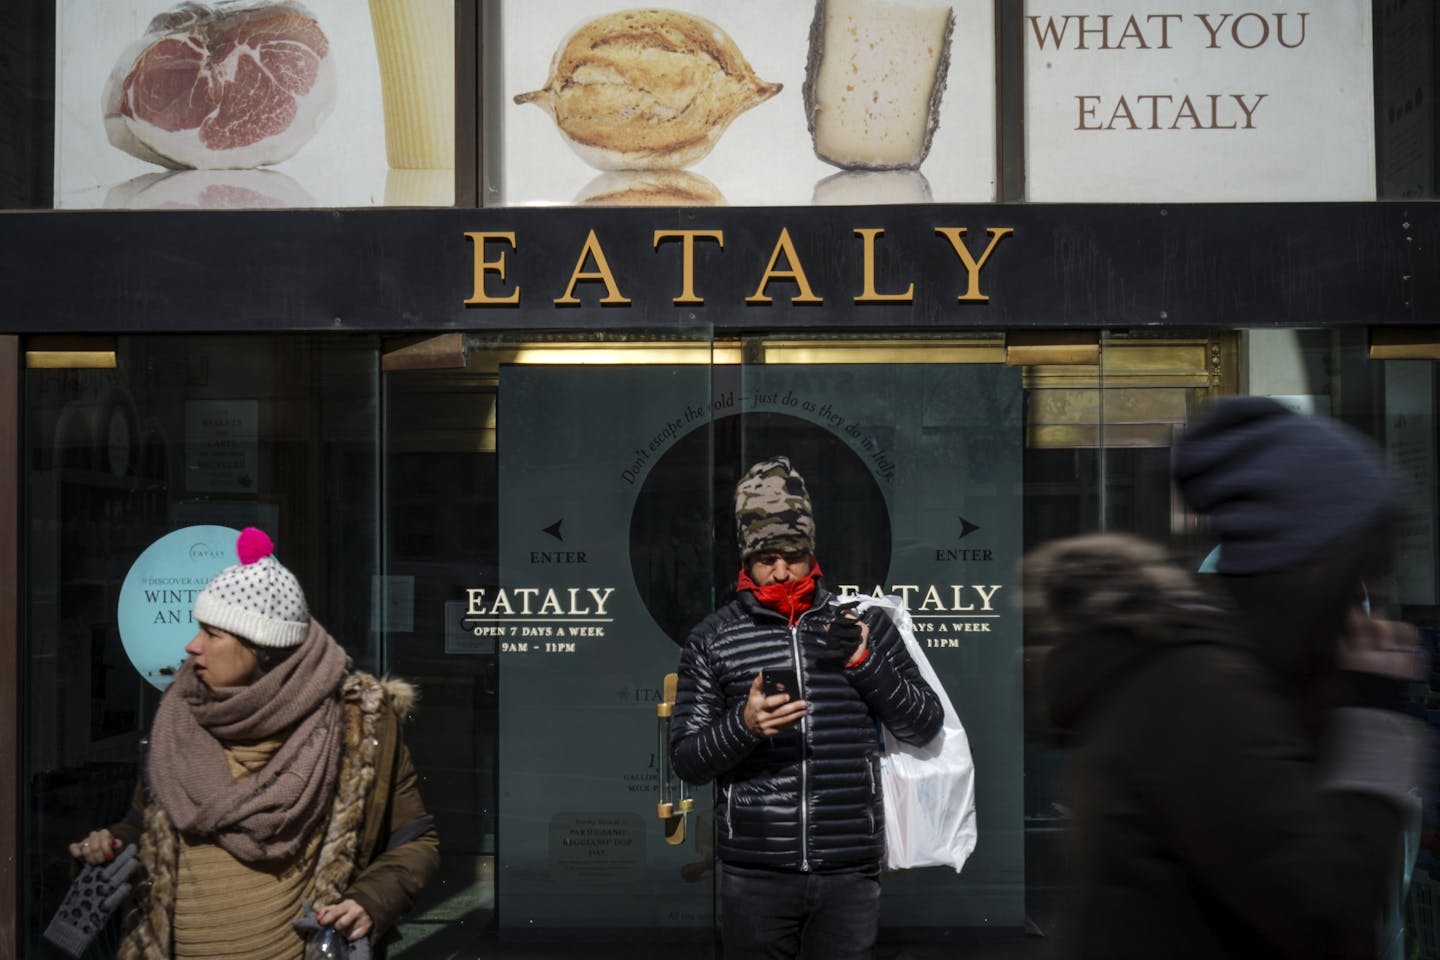 The entrance to New York City's Eataly food market.